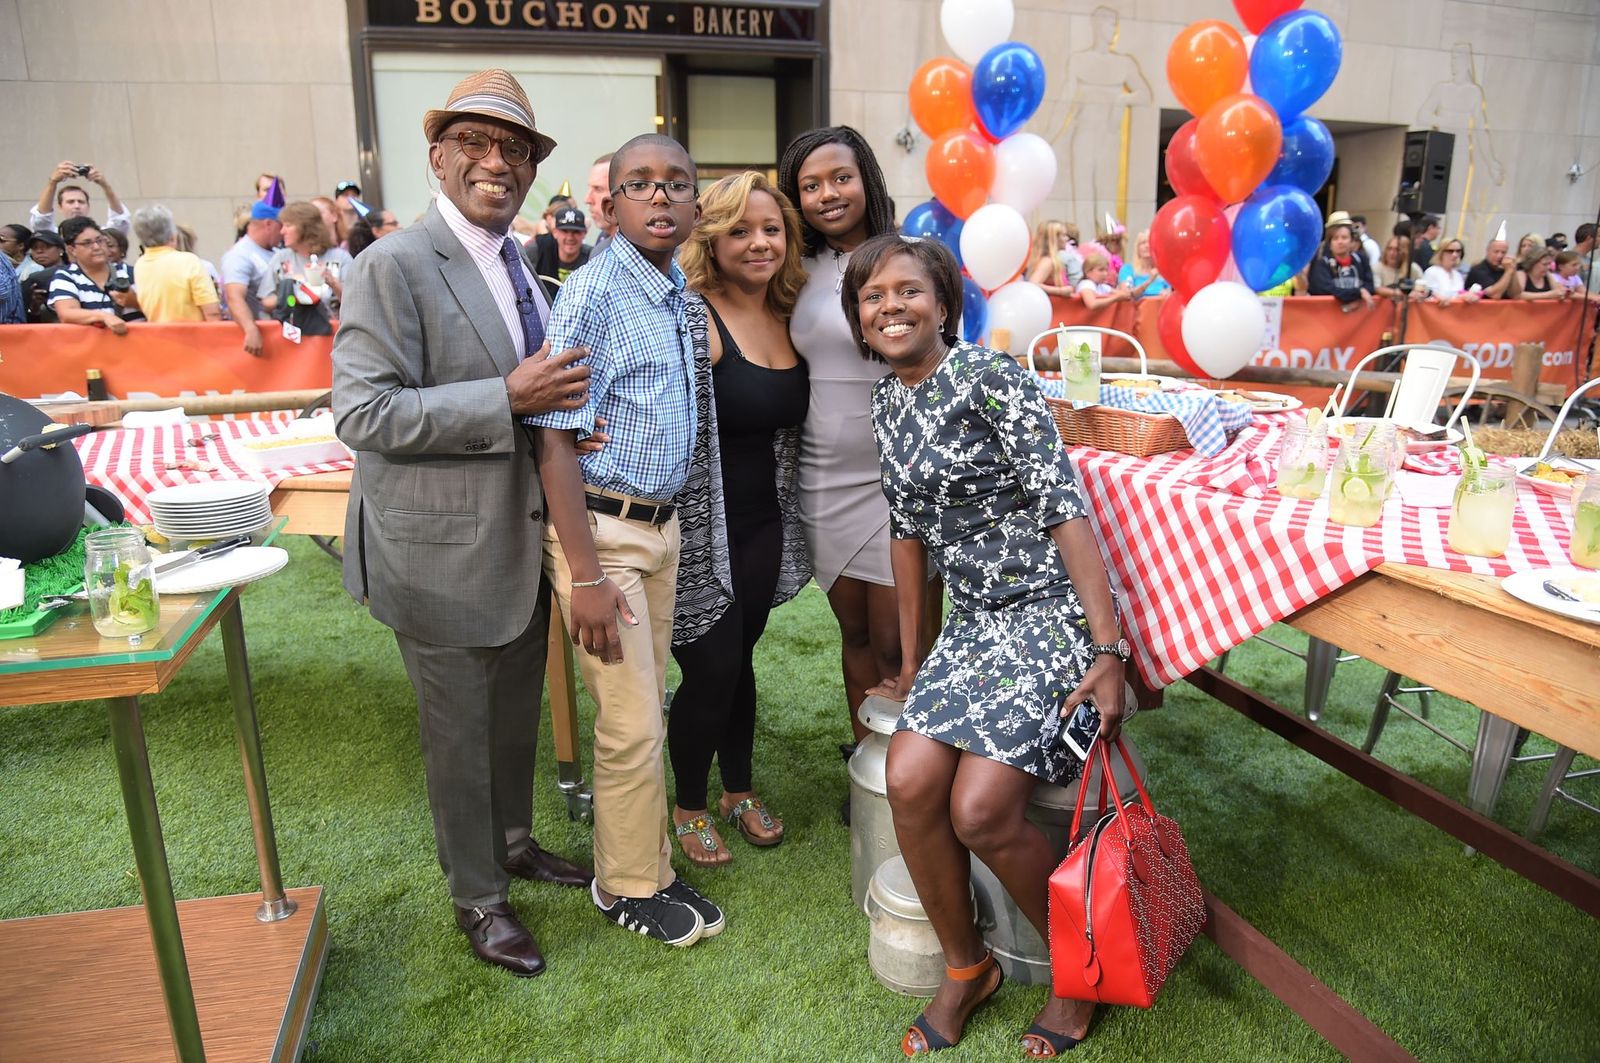 Al Roker and his Family on the "Today" show on August 20, 2014 | Photo: Michael Loccisano/NBC/NBC Newswire/NBCUniversal/Getty Images